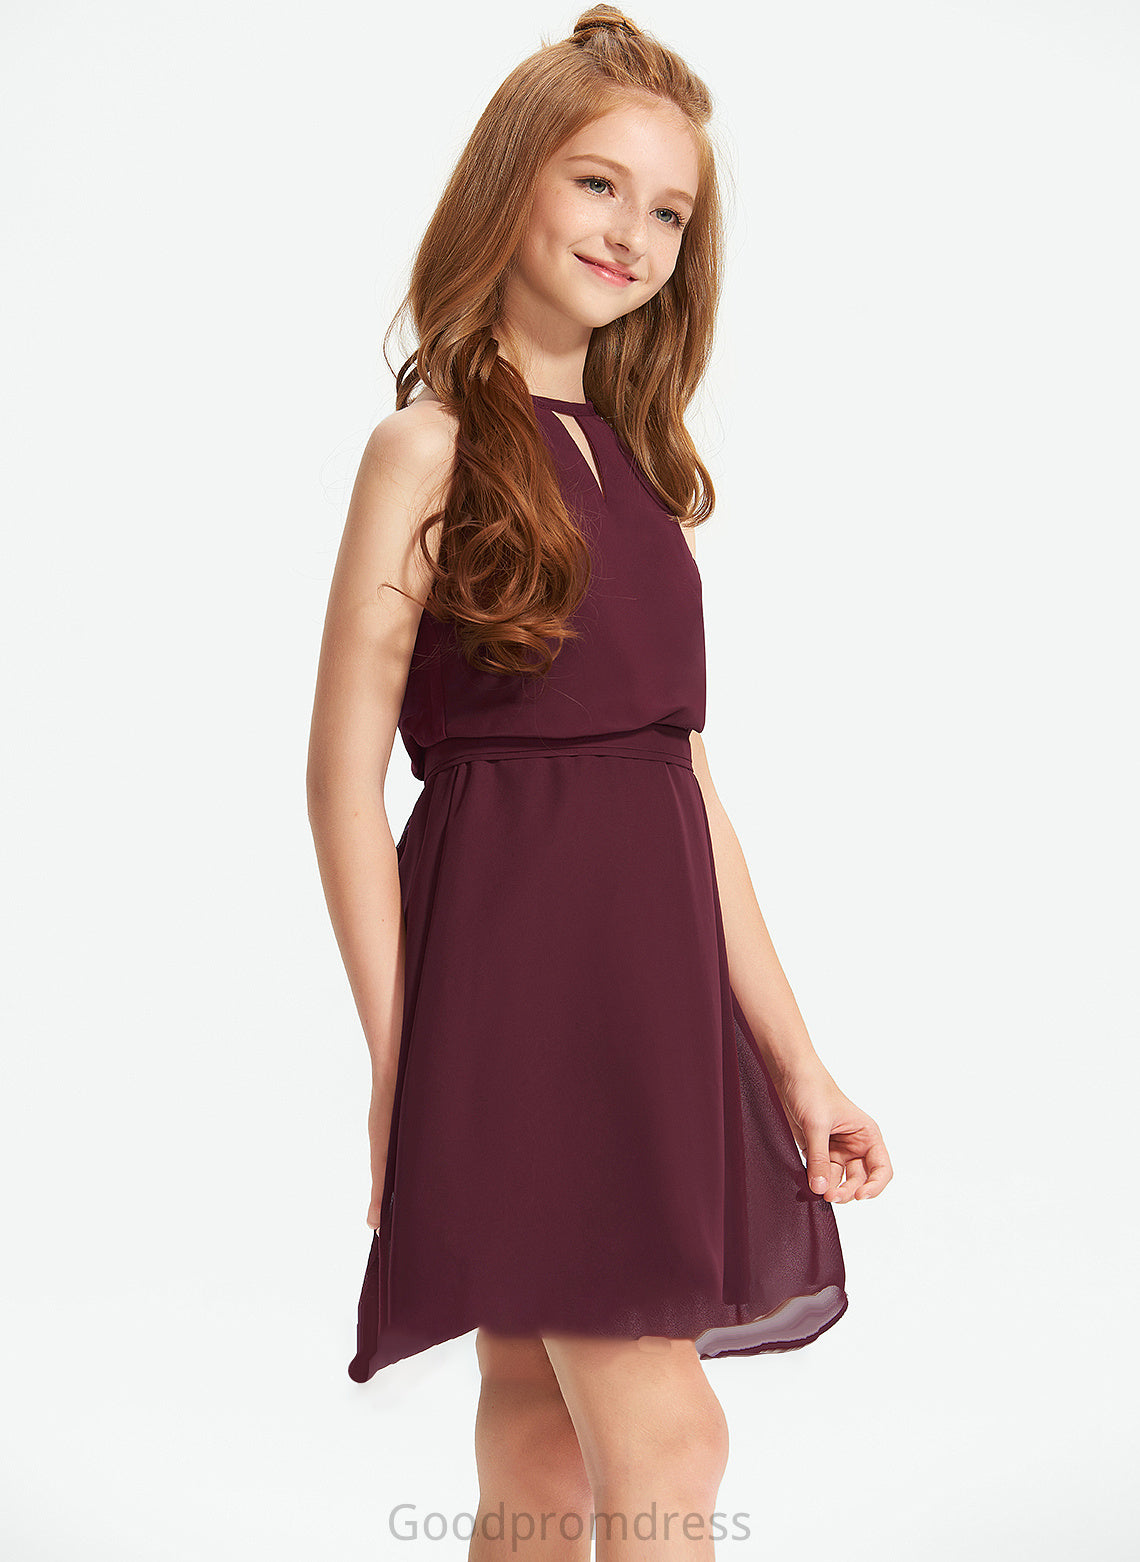 Bow(s) Chiffon With Neck Poll Junior Bridesmaid Dresses Scoop Knee-Length A-Line